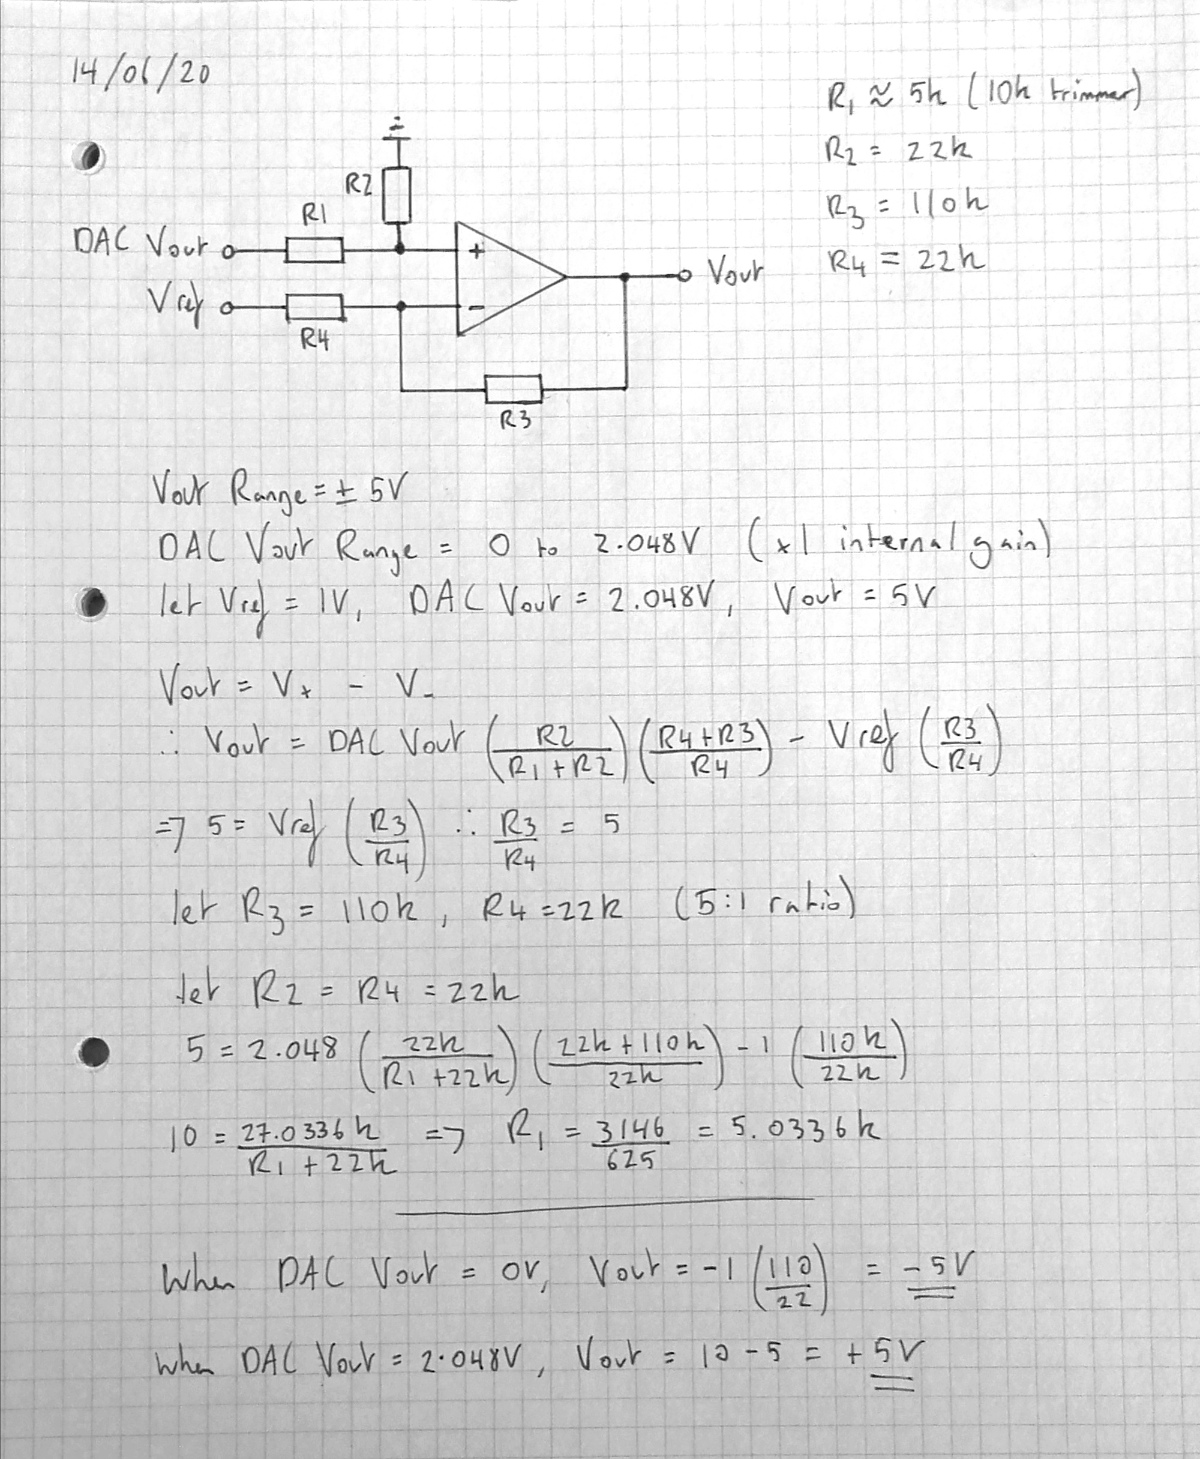 DAC differential amplifier calculations